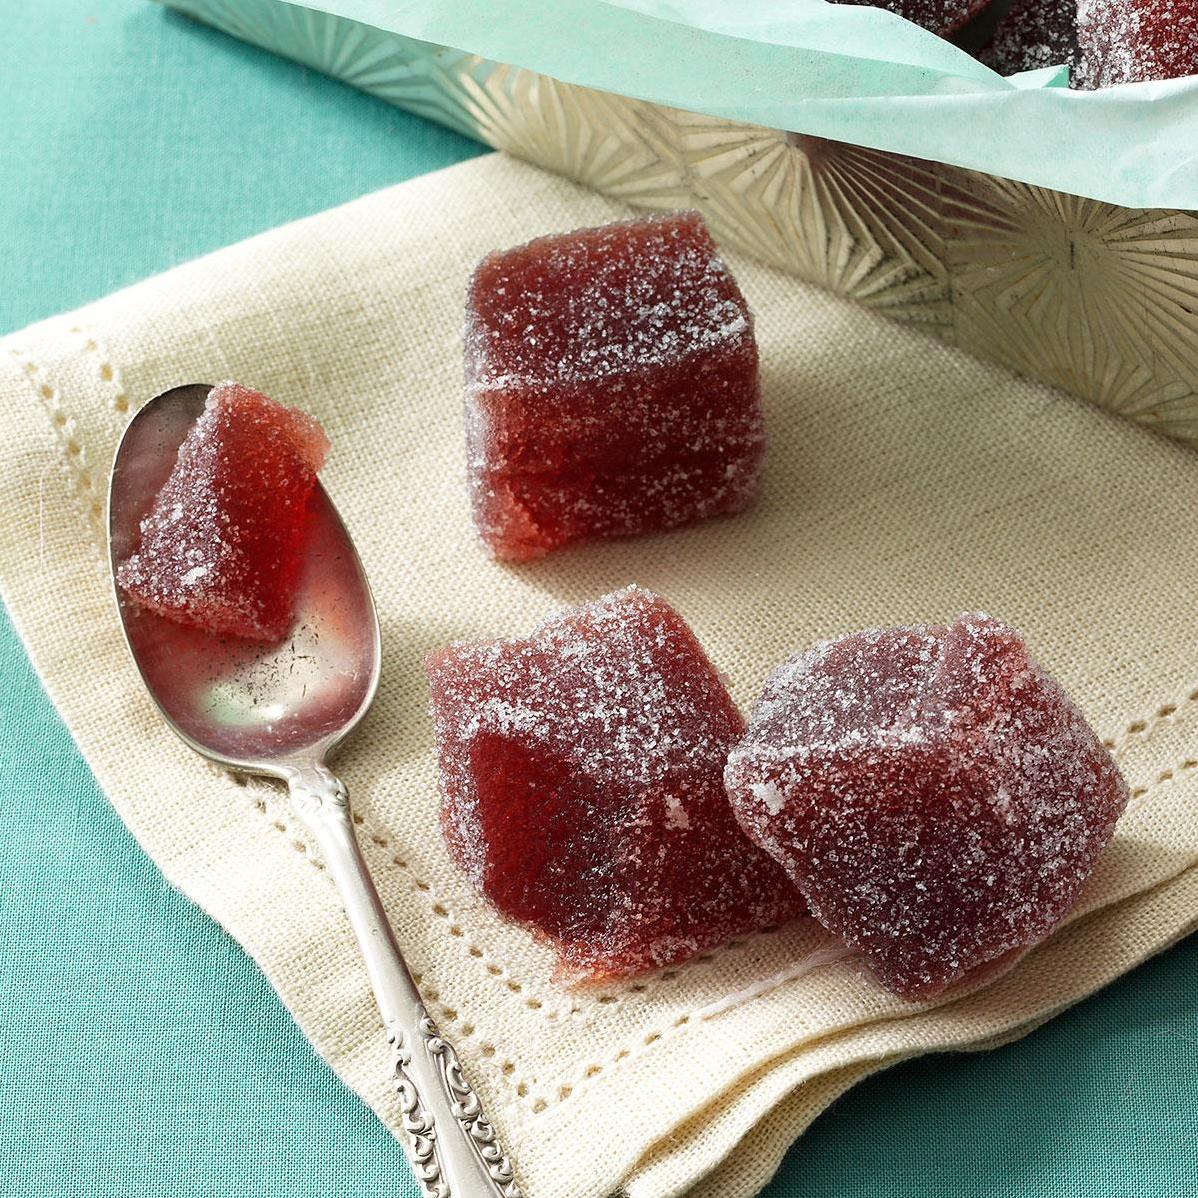  The perfect gourmet treat - Wine Jelly for connoisseurs!